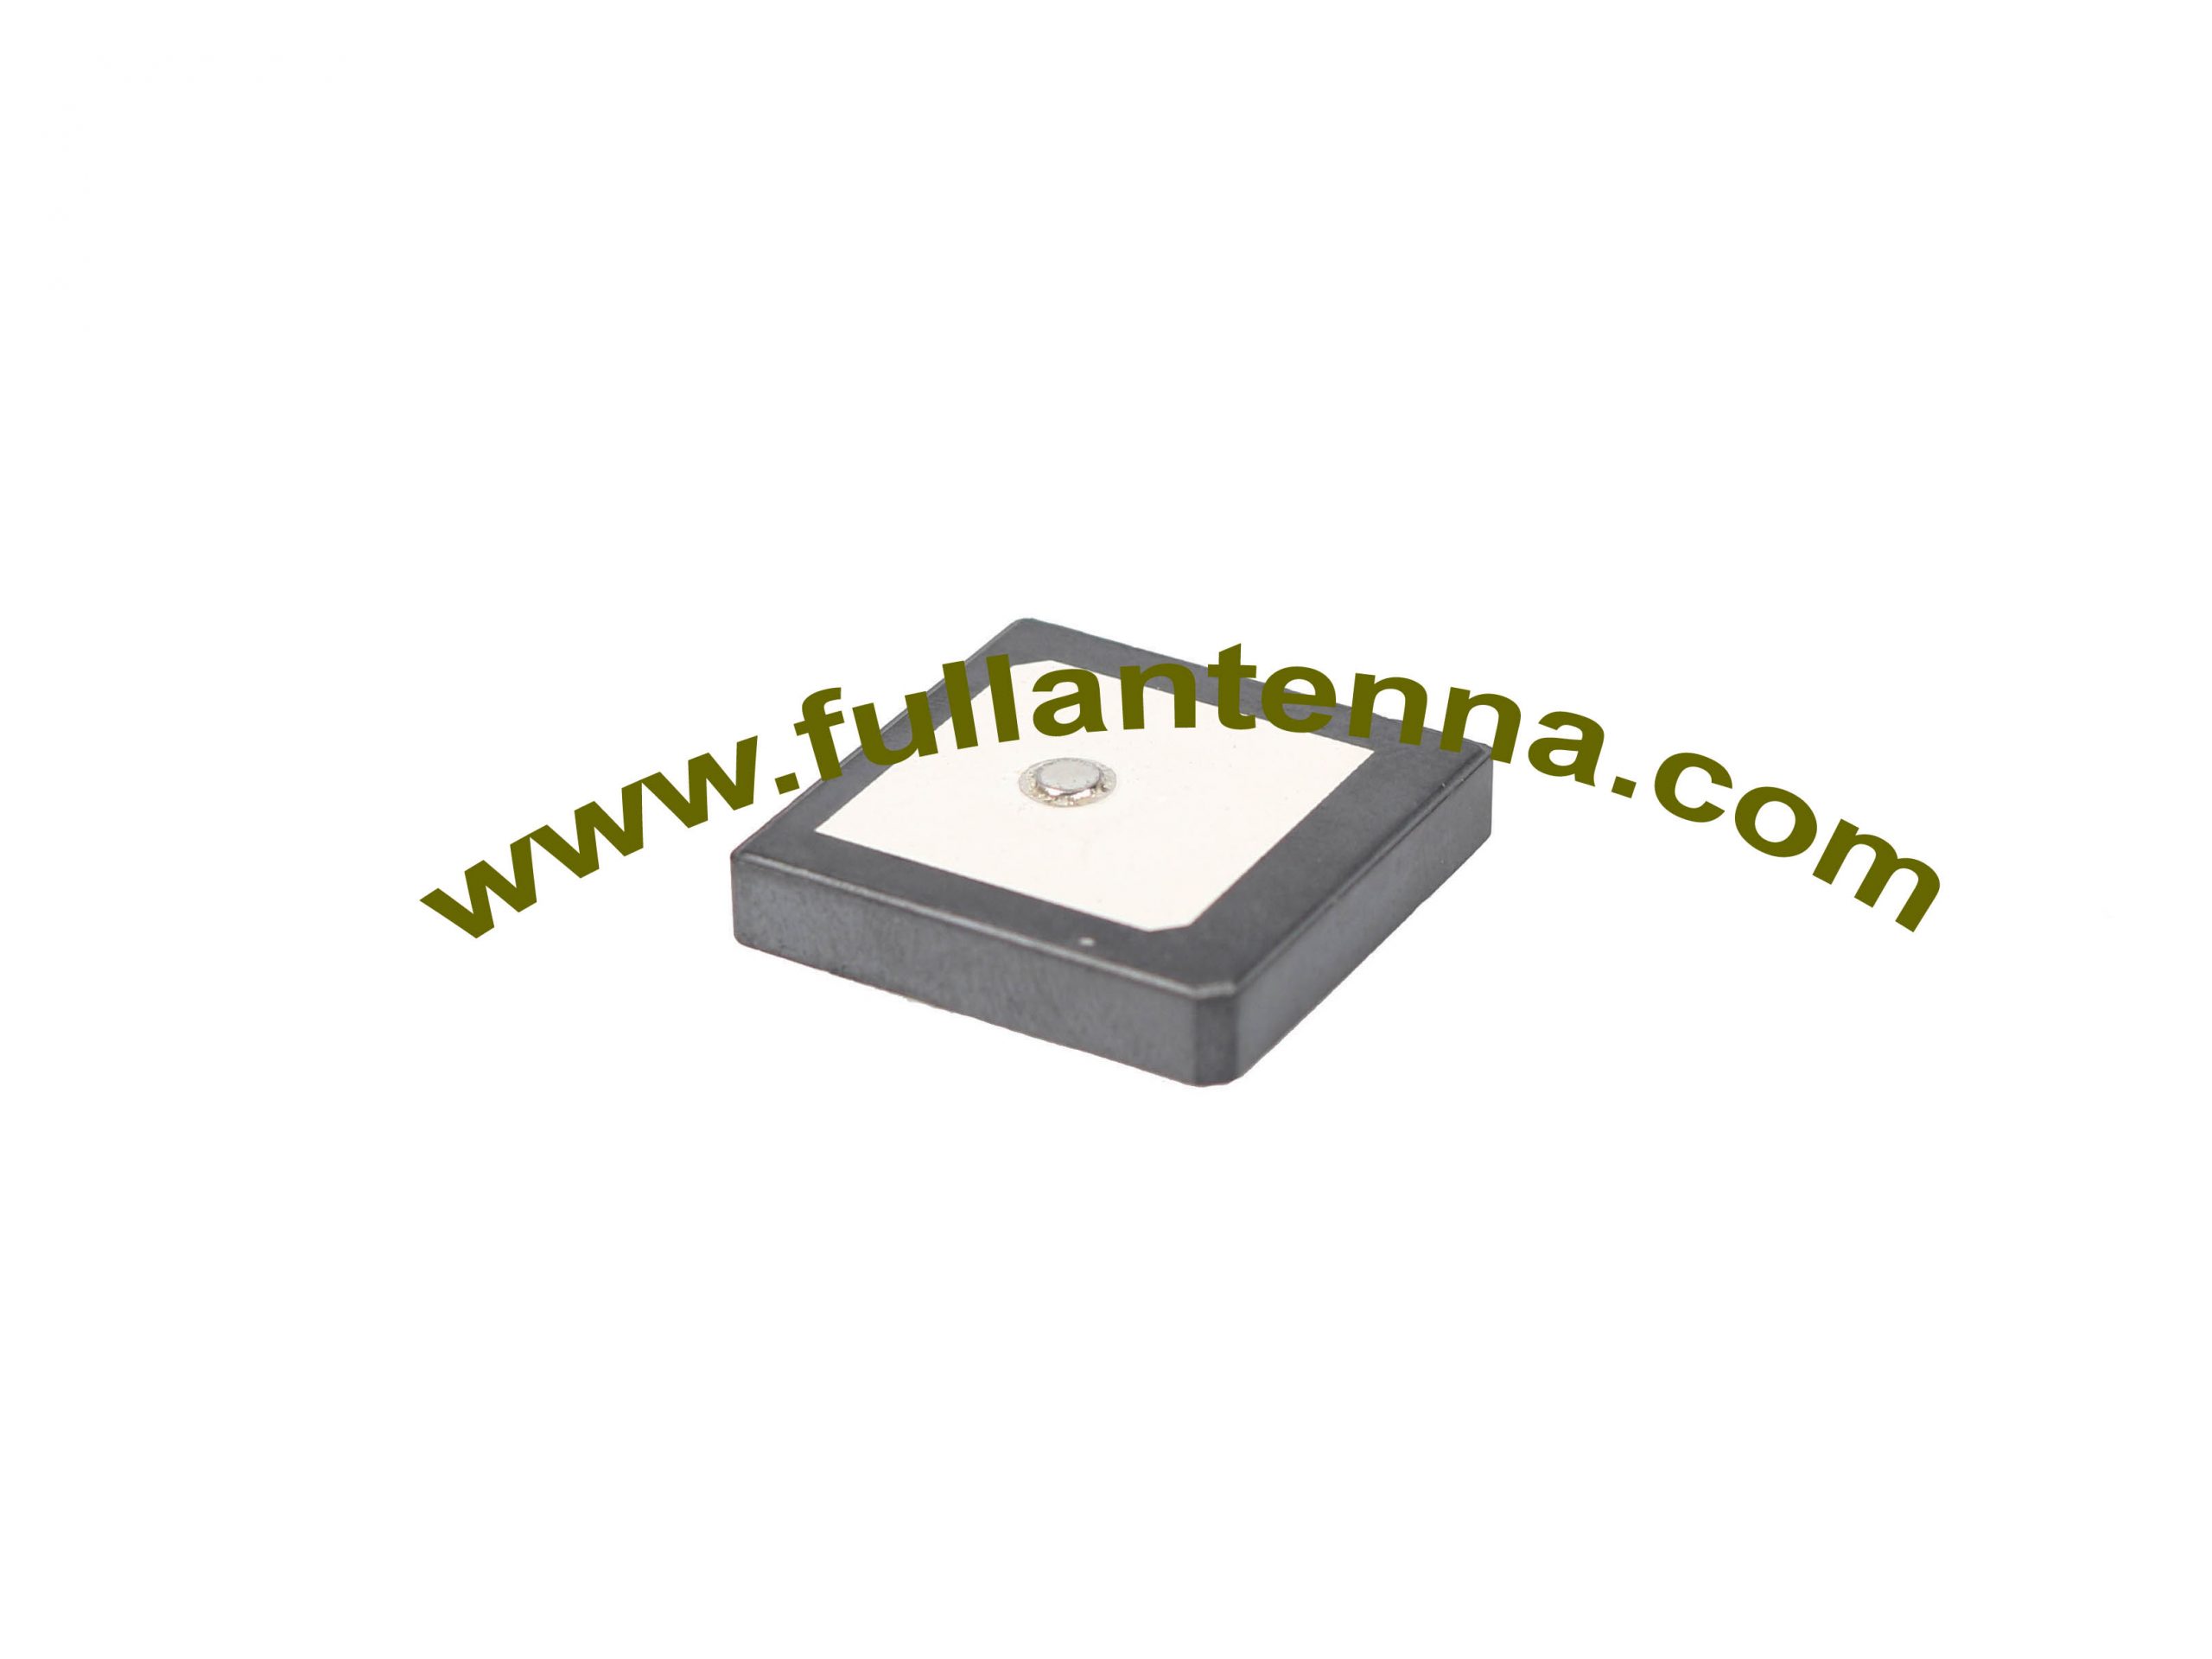 P/N:FAGPSGlonass.204,Glonass Dielectric Antenna,Gnss patch   aerial with pin 20x20x4mm